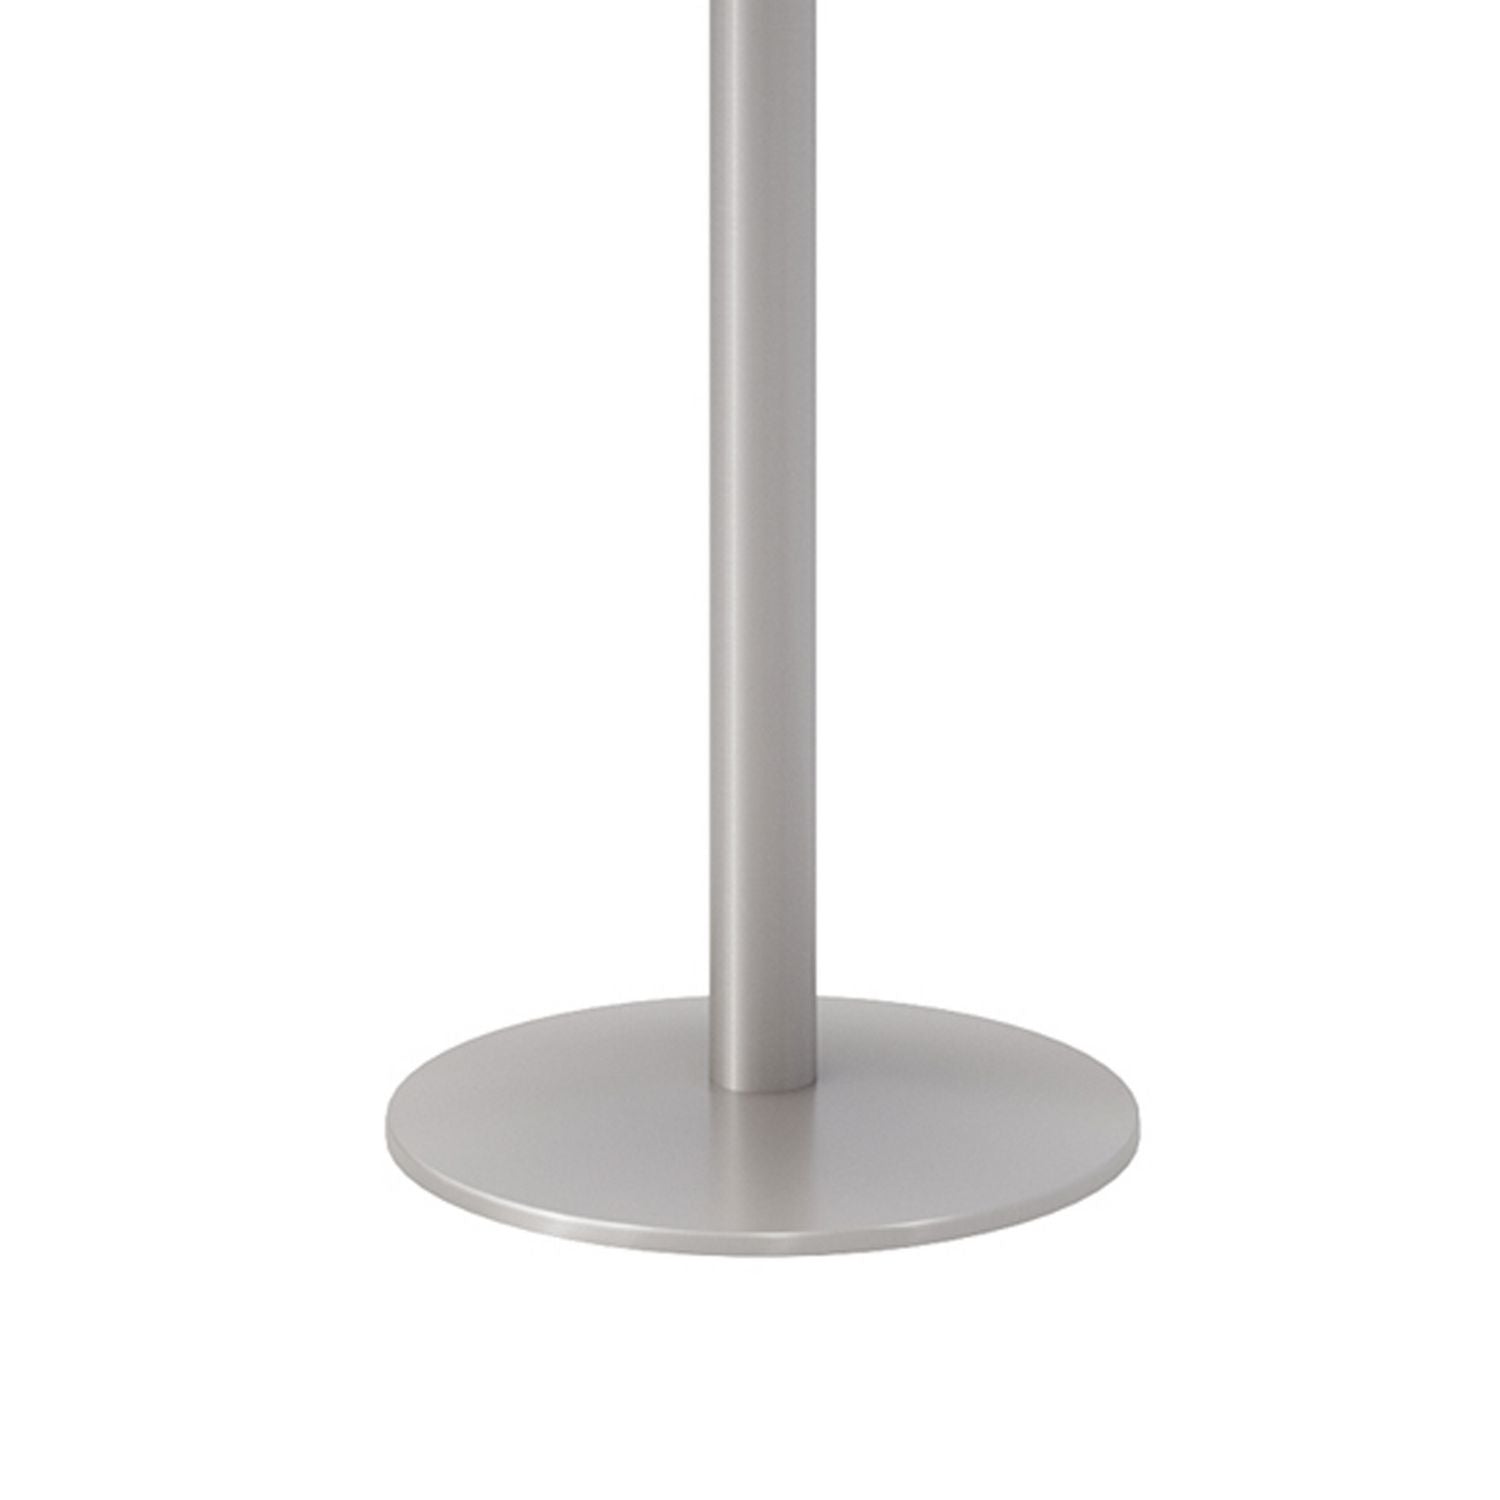 pedestal-bistro-table-with-four-natural-jive-series-barstools-round-36-dia-x-41h-designer-white-ships-in-4-6-bus-days_kfi840031900104 - 2